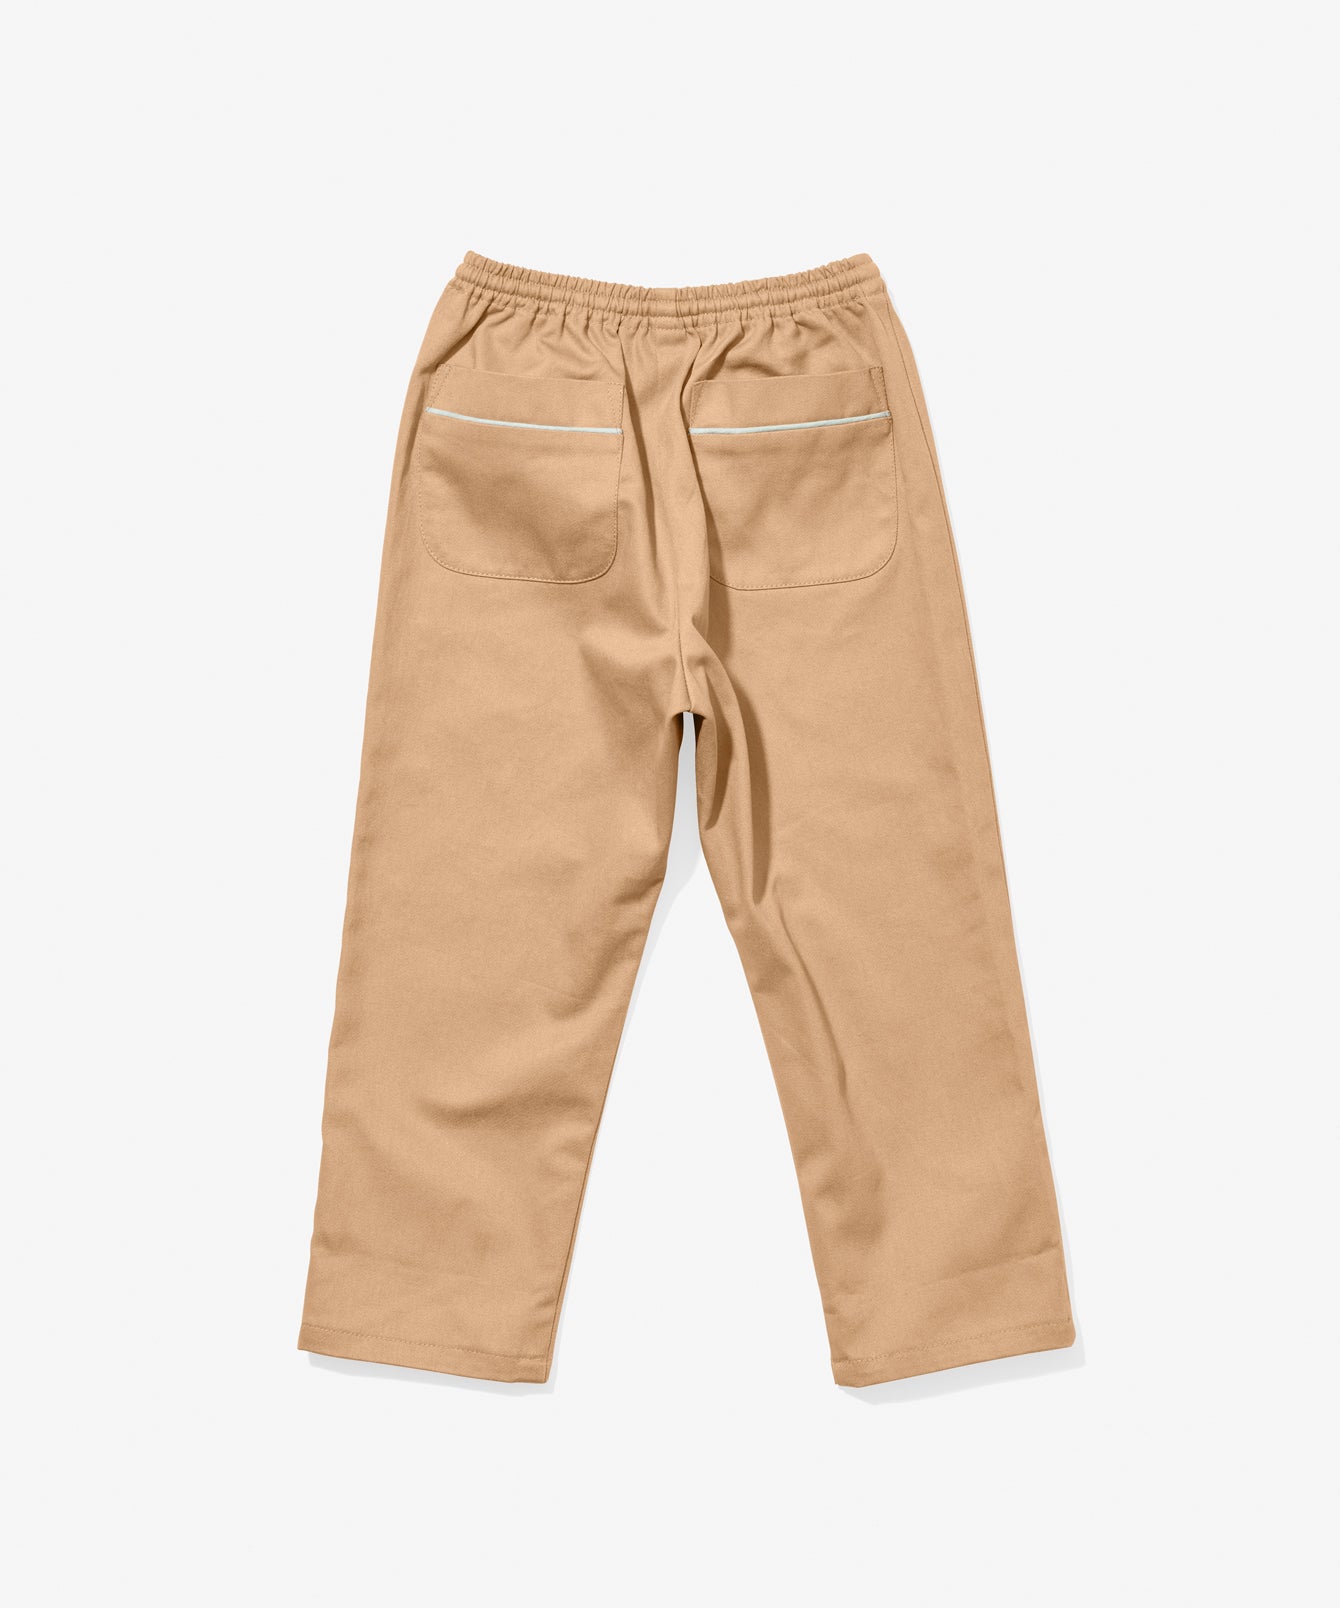 Tan Child's Pant with Drawcord Waist | Oso & Me